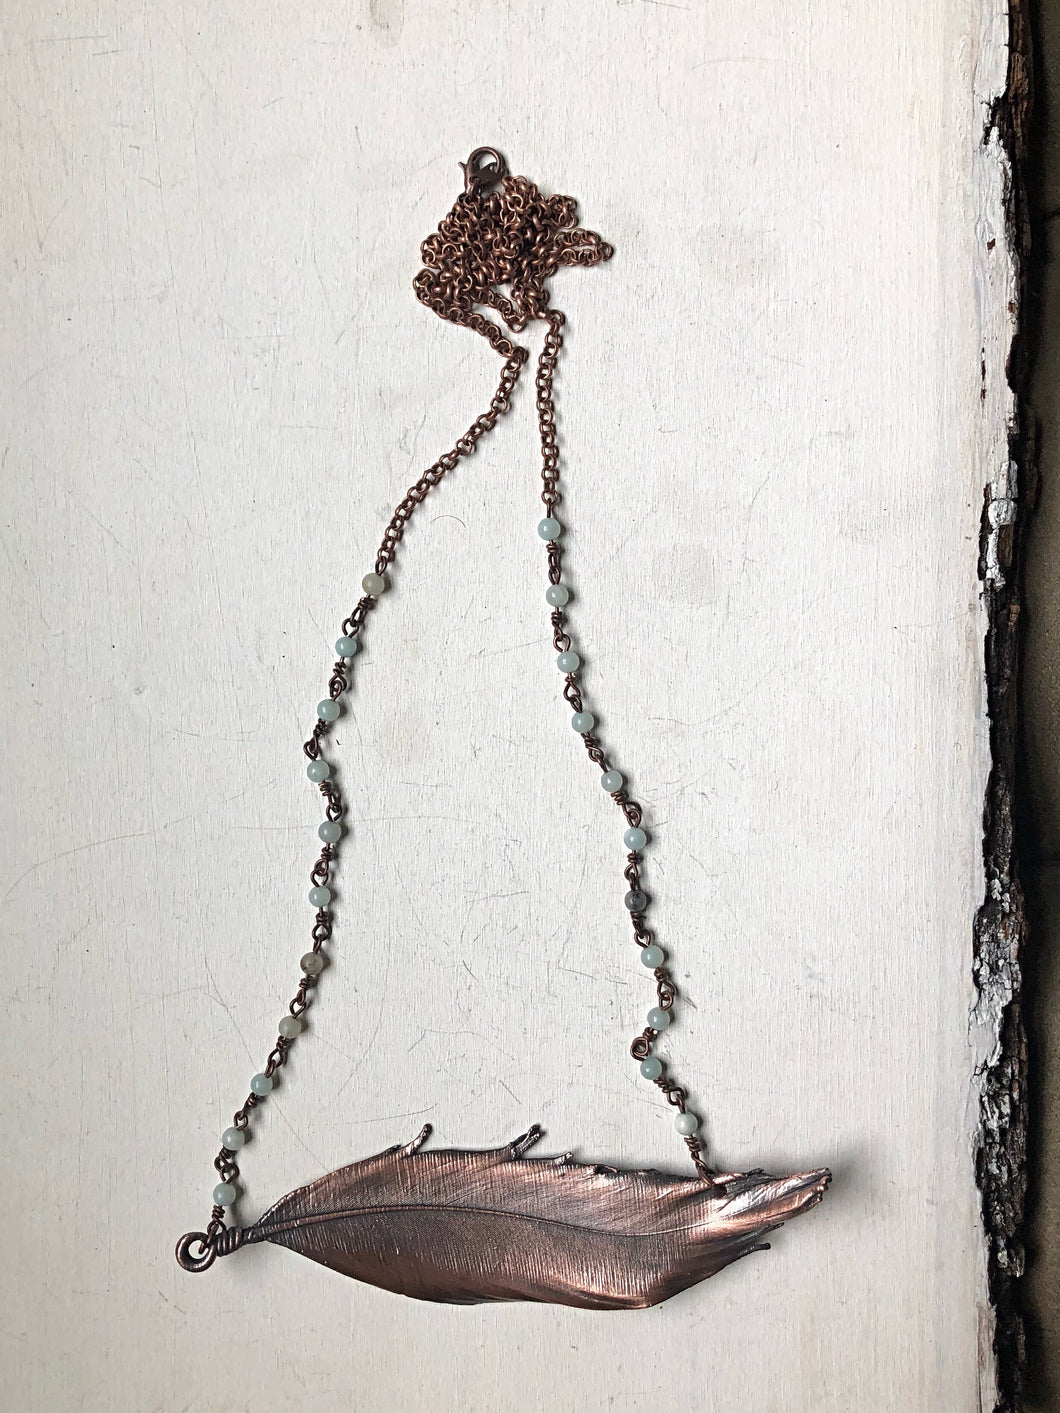 Electroformed Wild Feather Necklace with Amazonite Accent Chain (Horizontal Style) - Moksha Collection